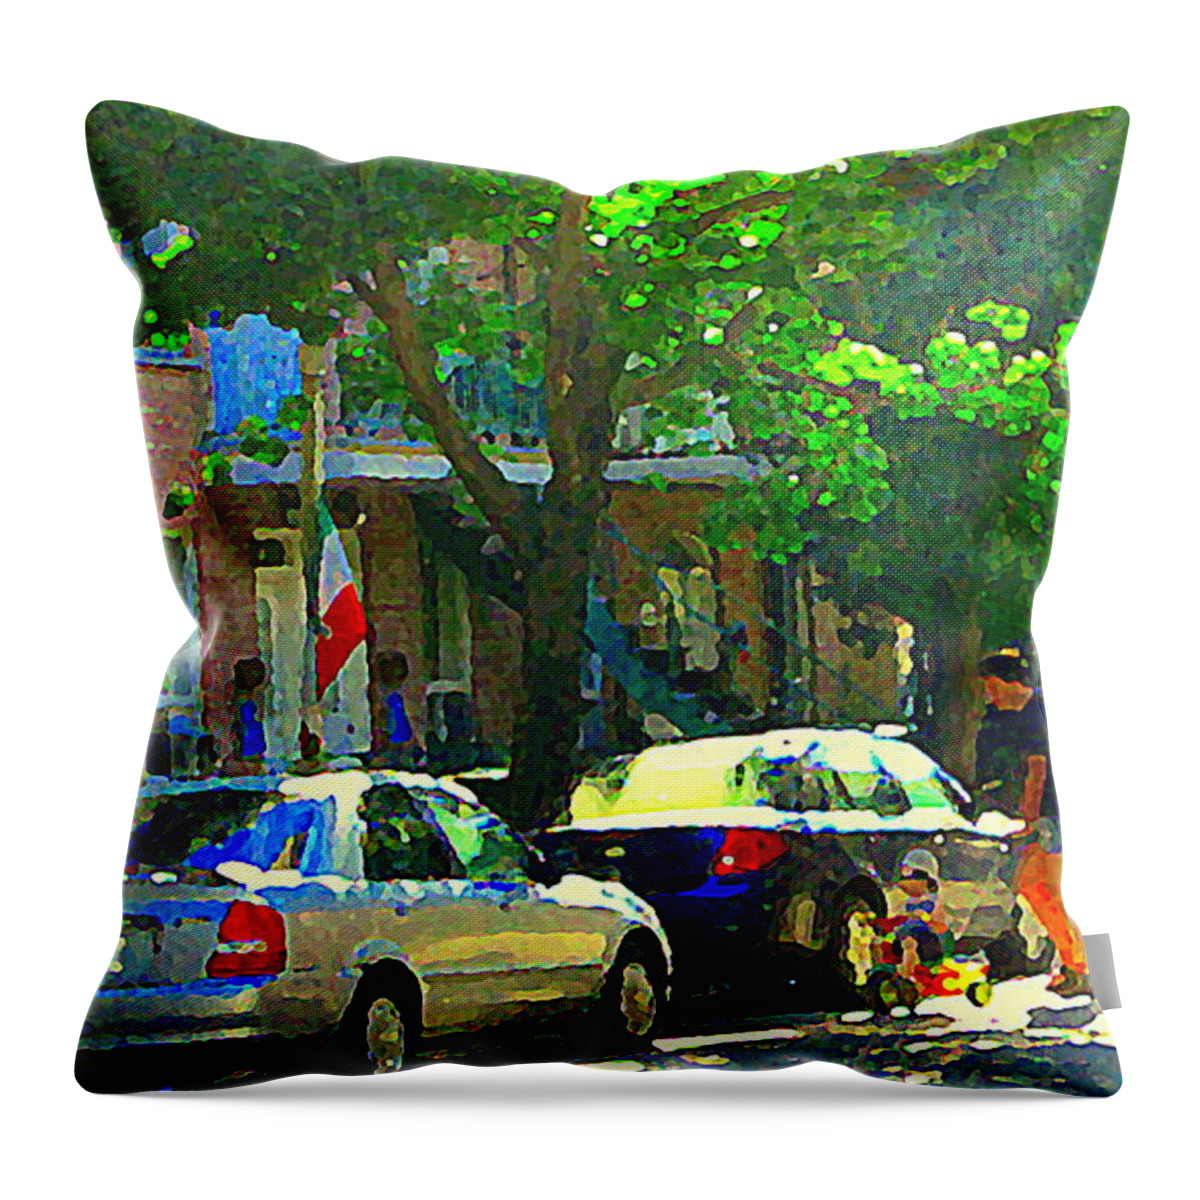 Montreal Throw Pillow featuring the painting Art Of Montreal Day With Daddy And Yellow Wagon Zooming Our Streets Of Verdun Scene Carole Spandau by Carole Spandau